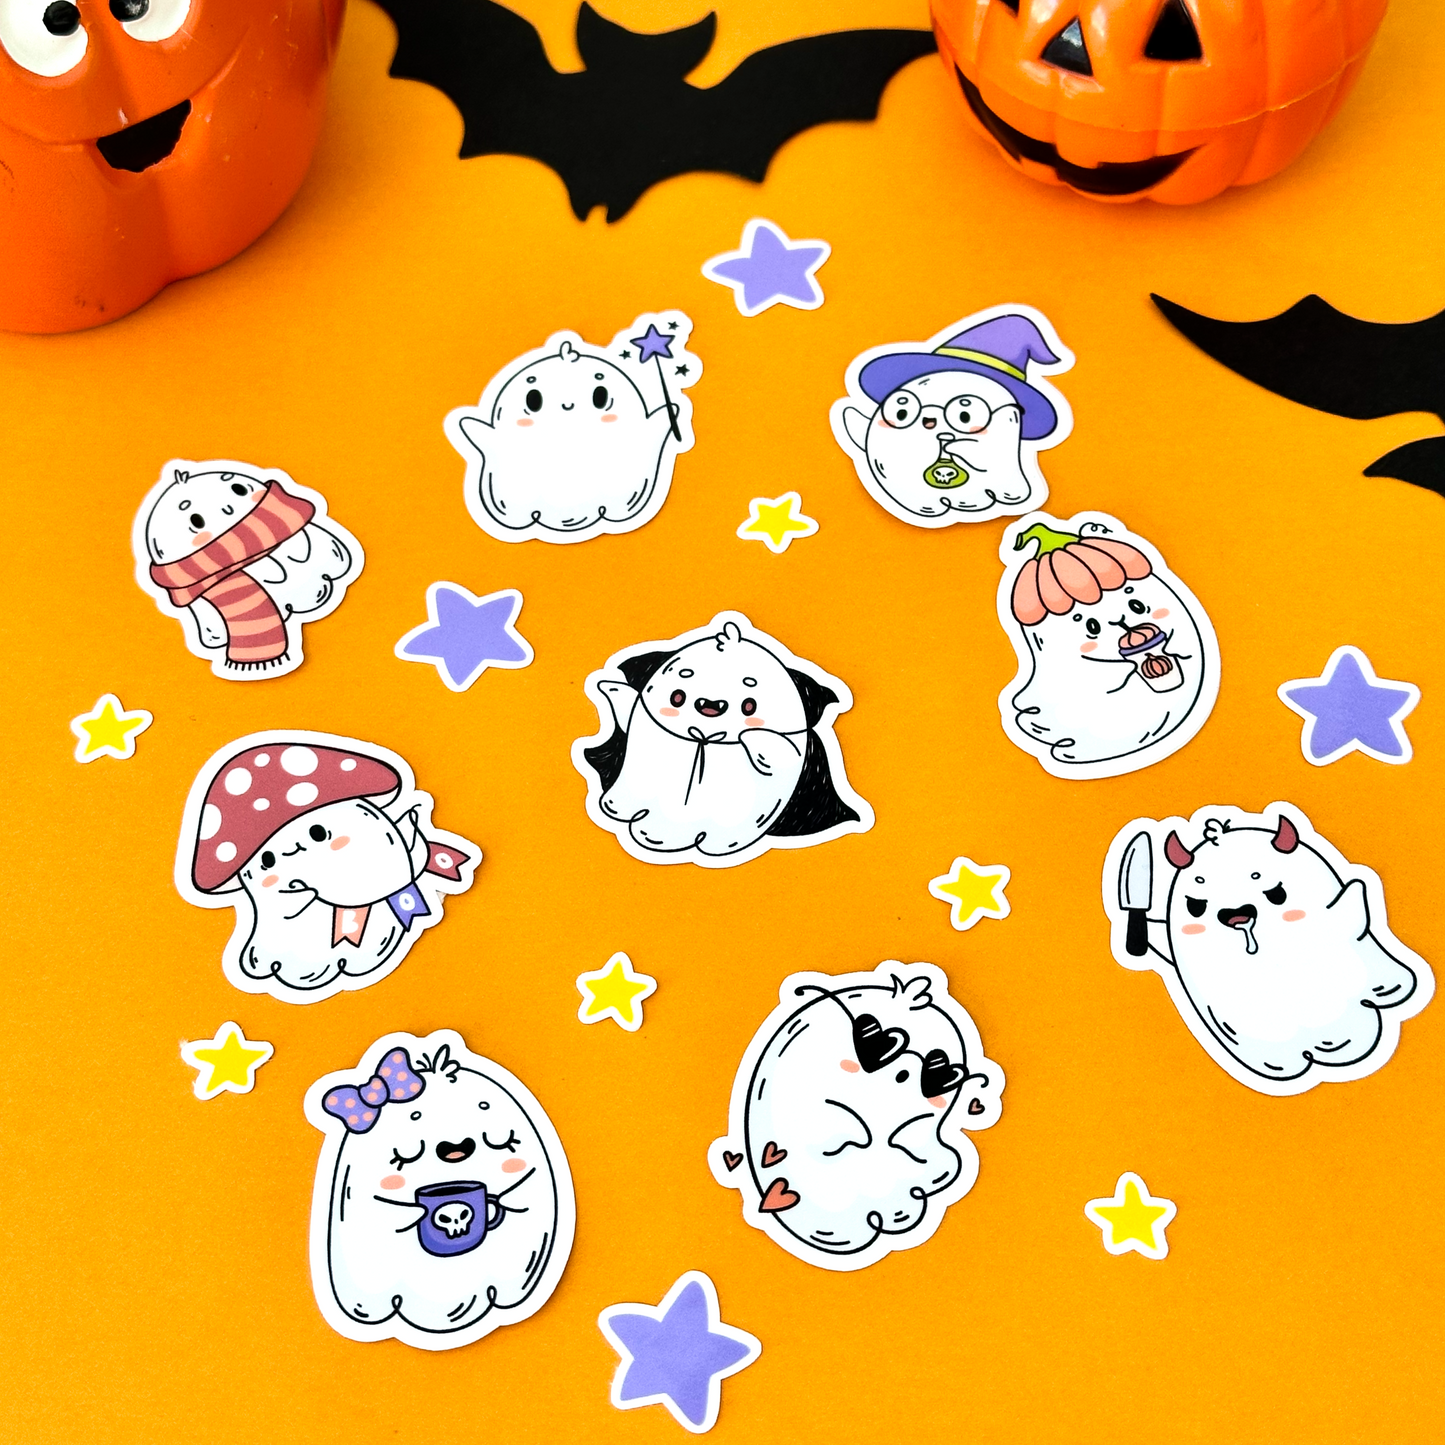 Spooky Ghosts Sticker Pack